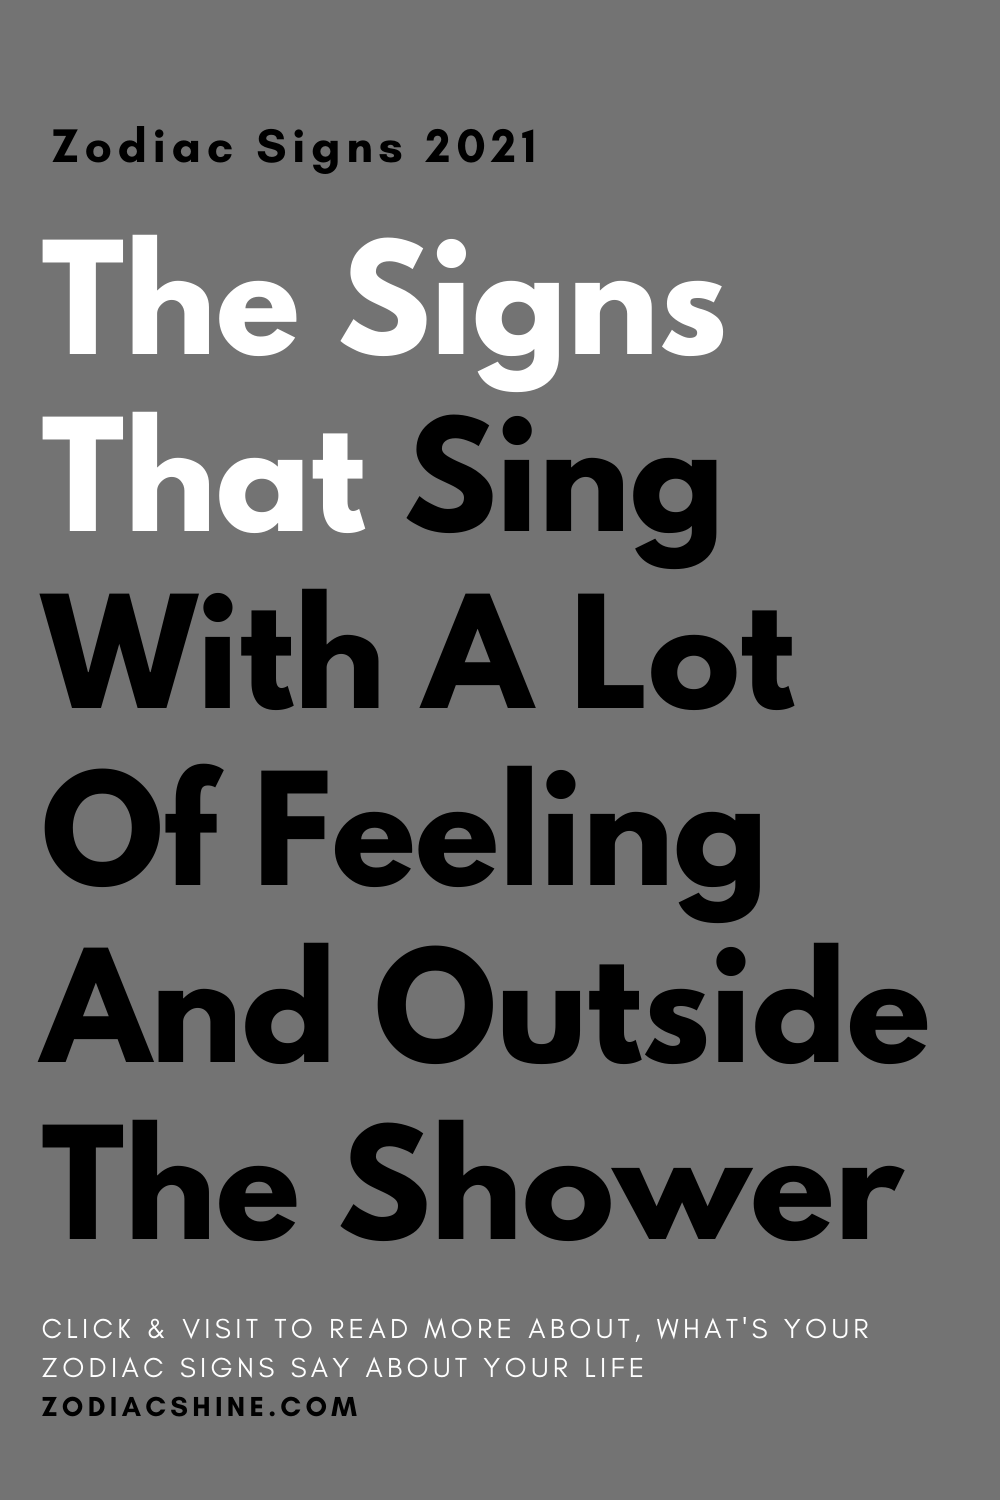 The Signs That Sing With A Lot Of Feeling And Outside The Shower